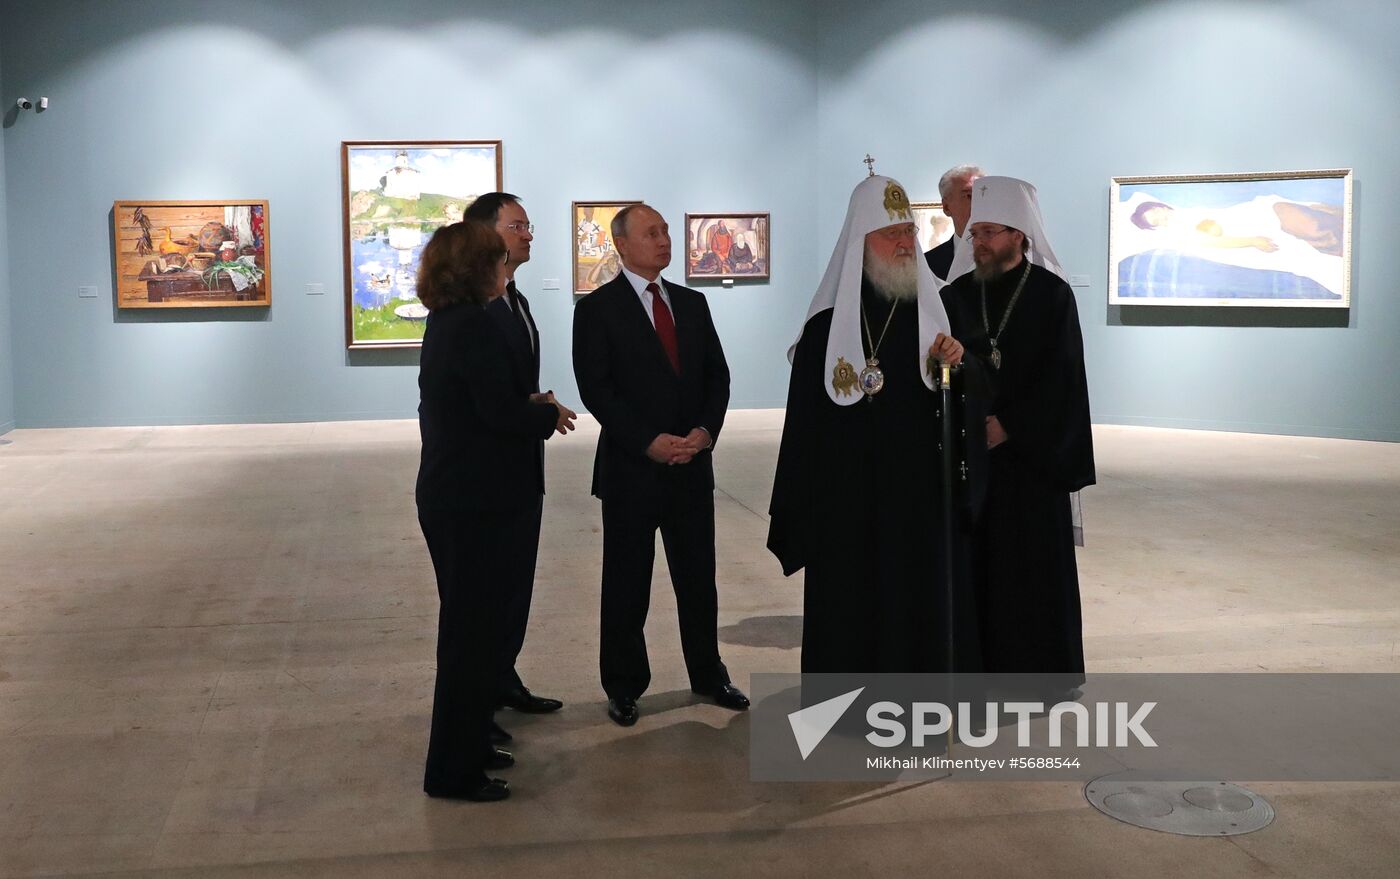 President Putin attends Treasures of Russian Museums exhibition